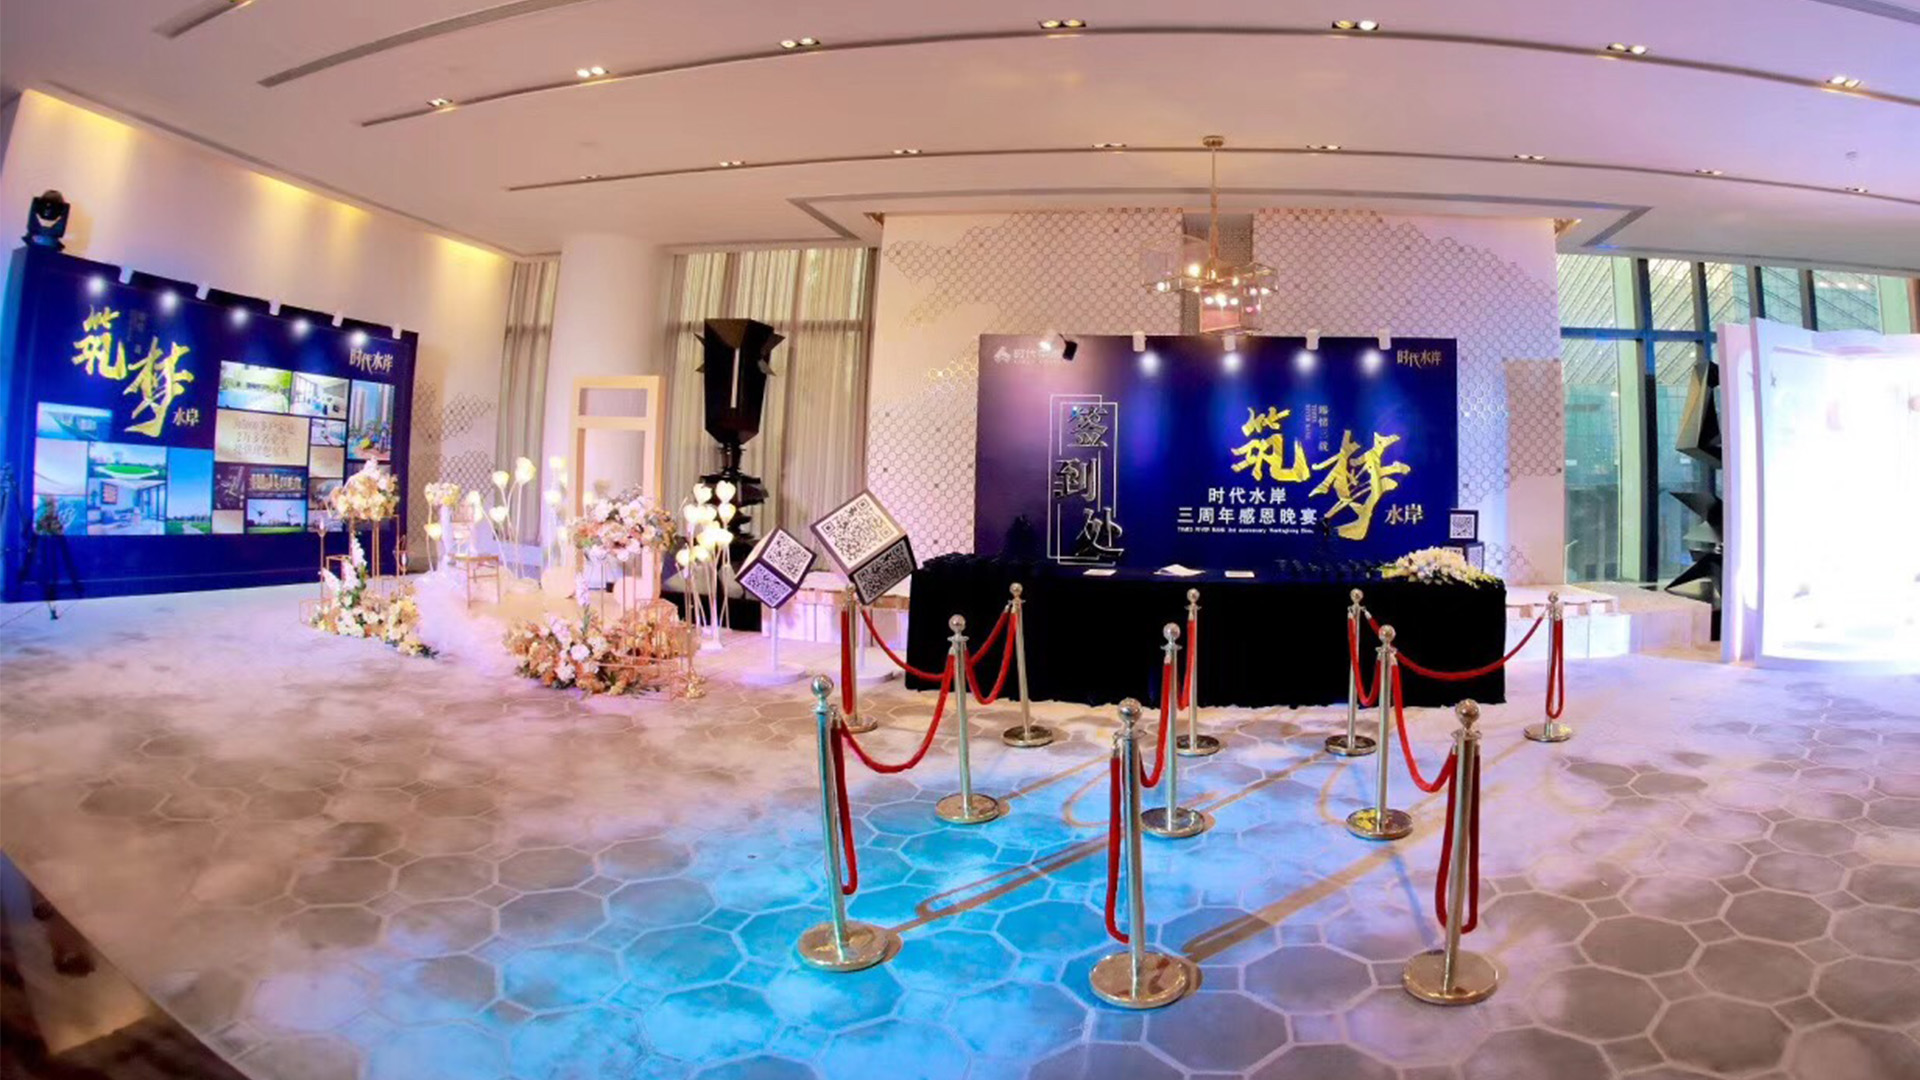 Themed Event and Conference Event for developers by D2 Studio Event Planner Event Agency Event Planner Hong Kong and Guangzhou China who does Themed Event and Conference Event 2